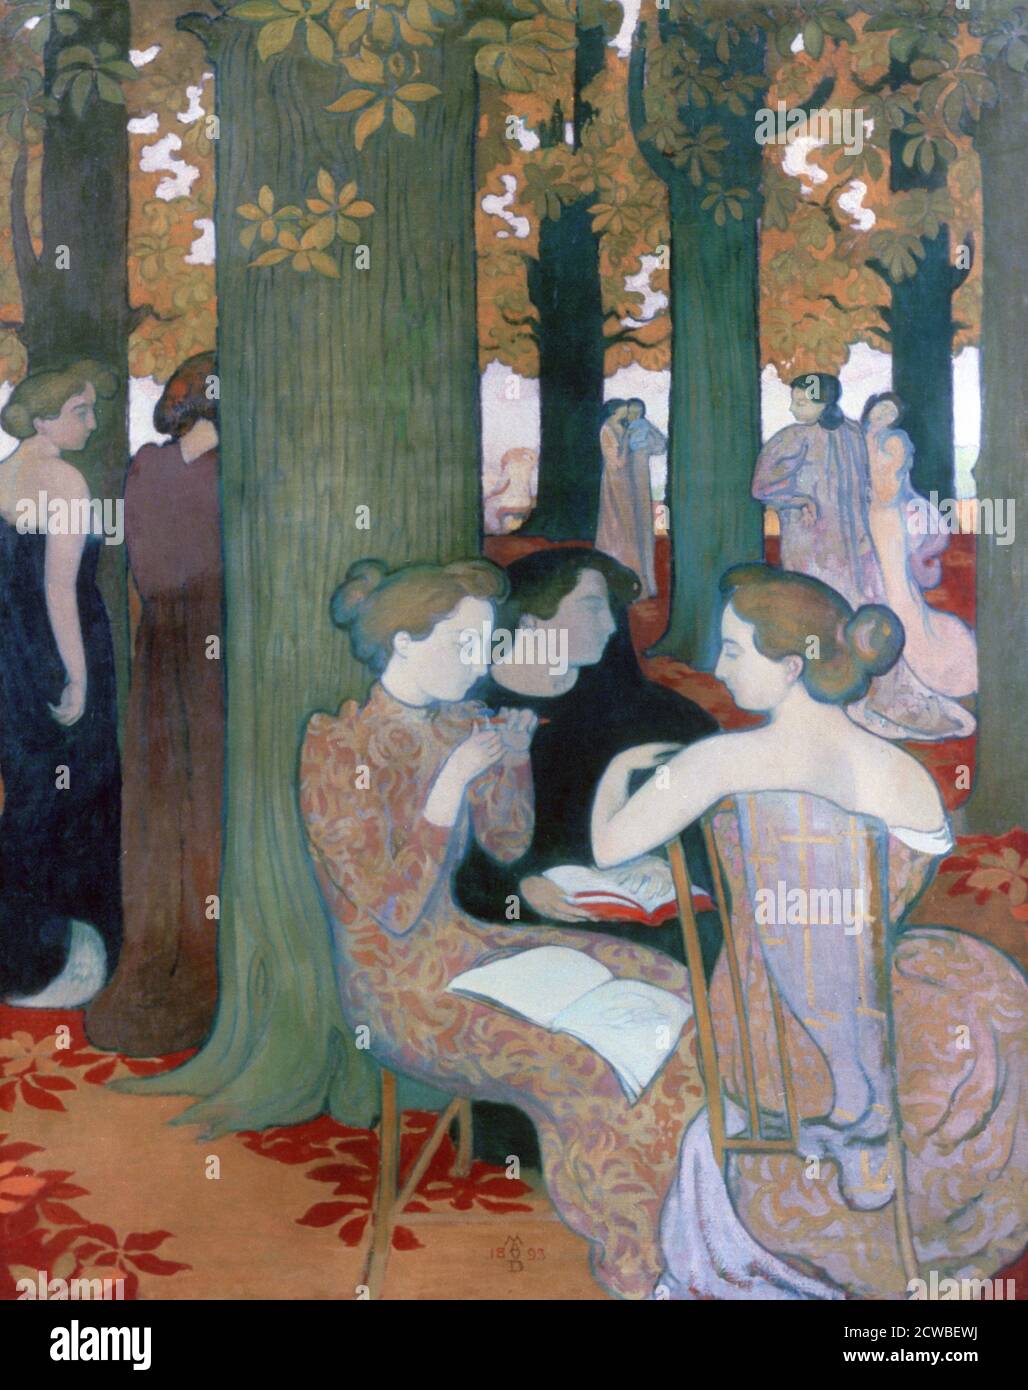 The Muses', 1893. Artist: Maurice Denis. Denis (1870-1943) was a French painter, decorative artist and writer, who was an important figure in the transitional period between impressionism and modern art. Stock Photo